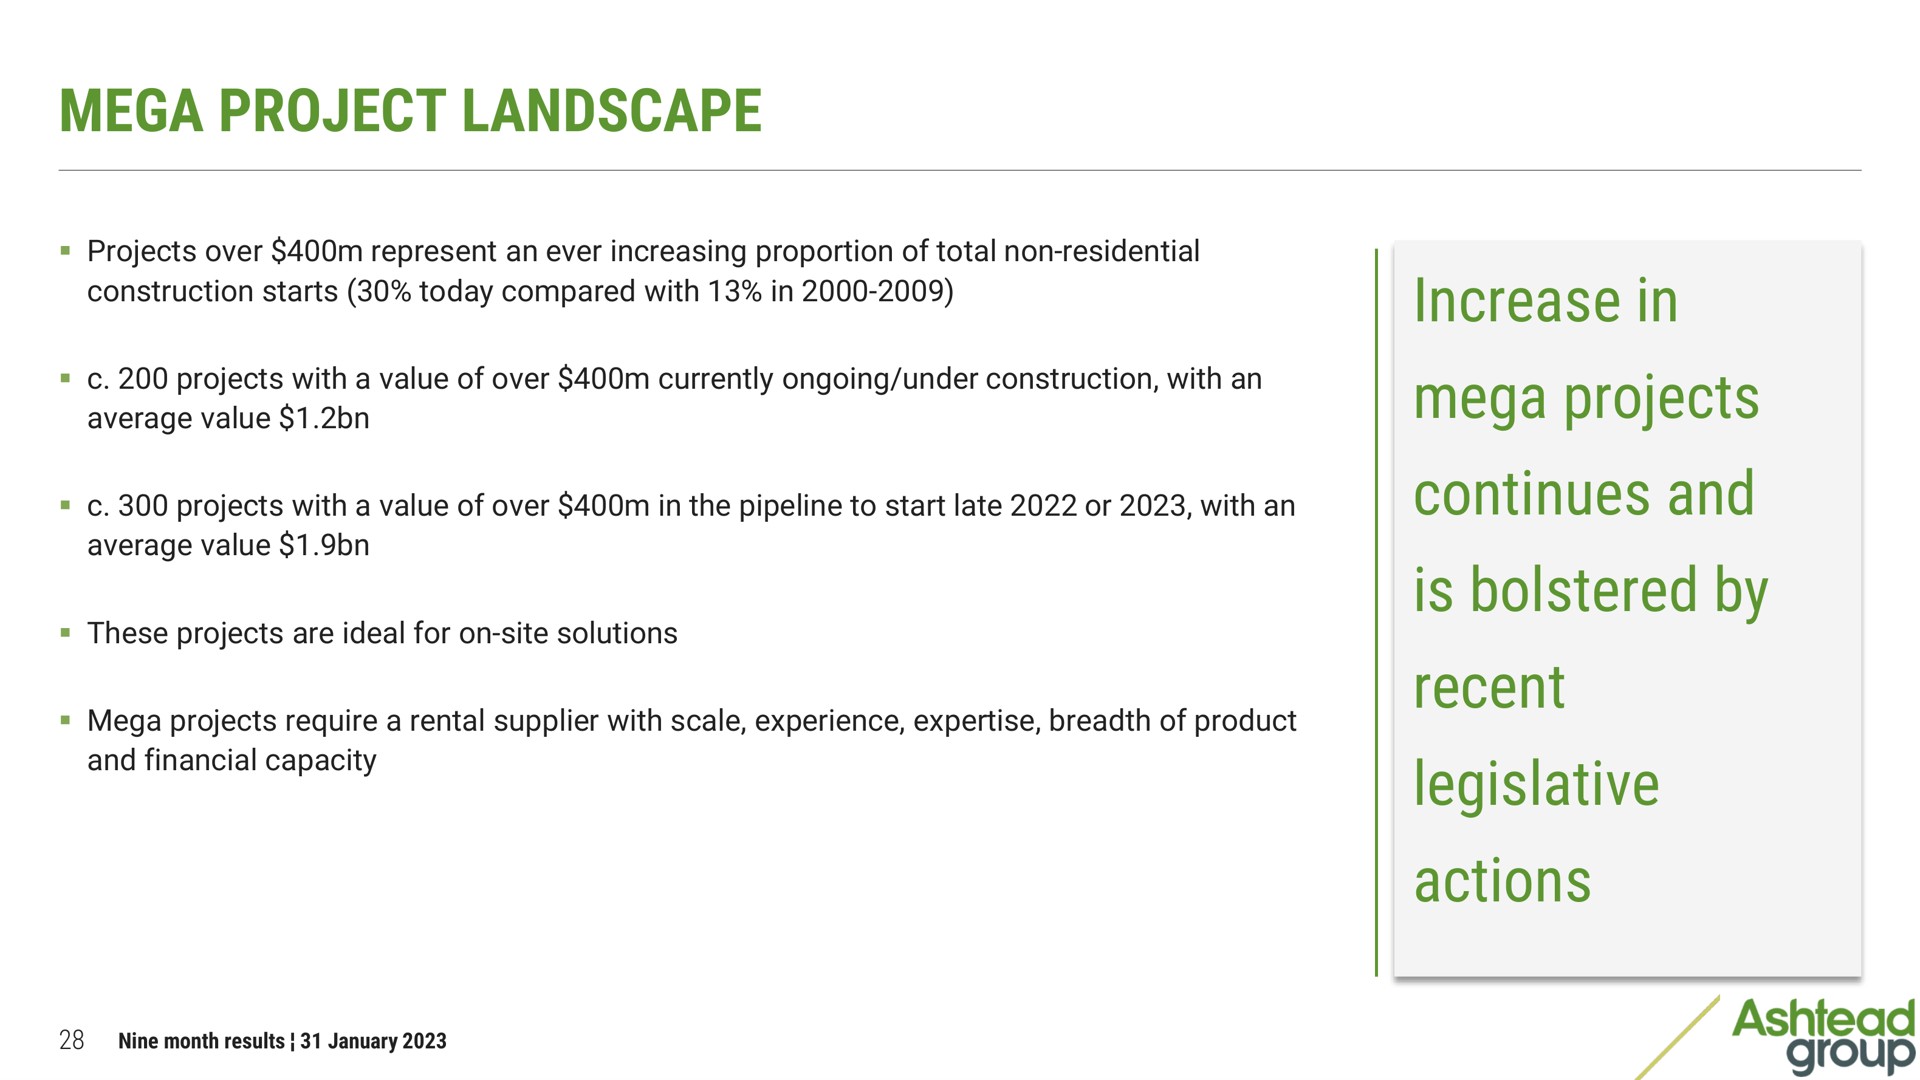 project landscape increase in projects continues and is bolstered by recent legislative actions | Ashtead Group